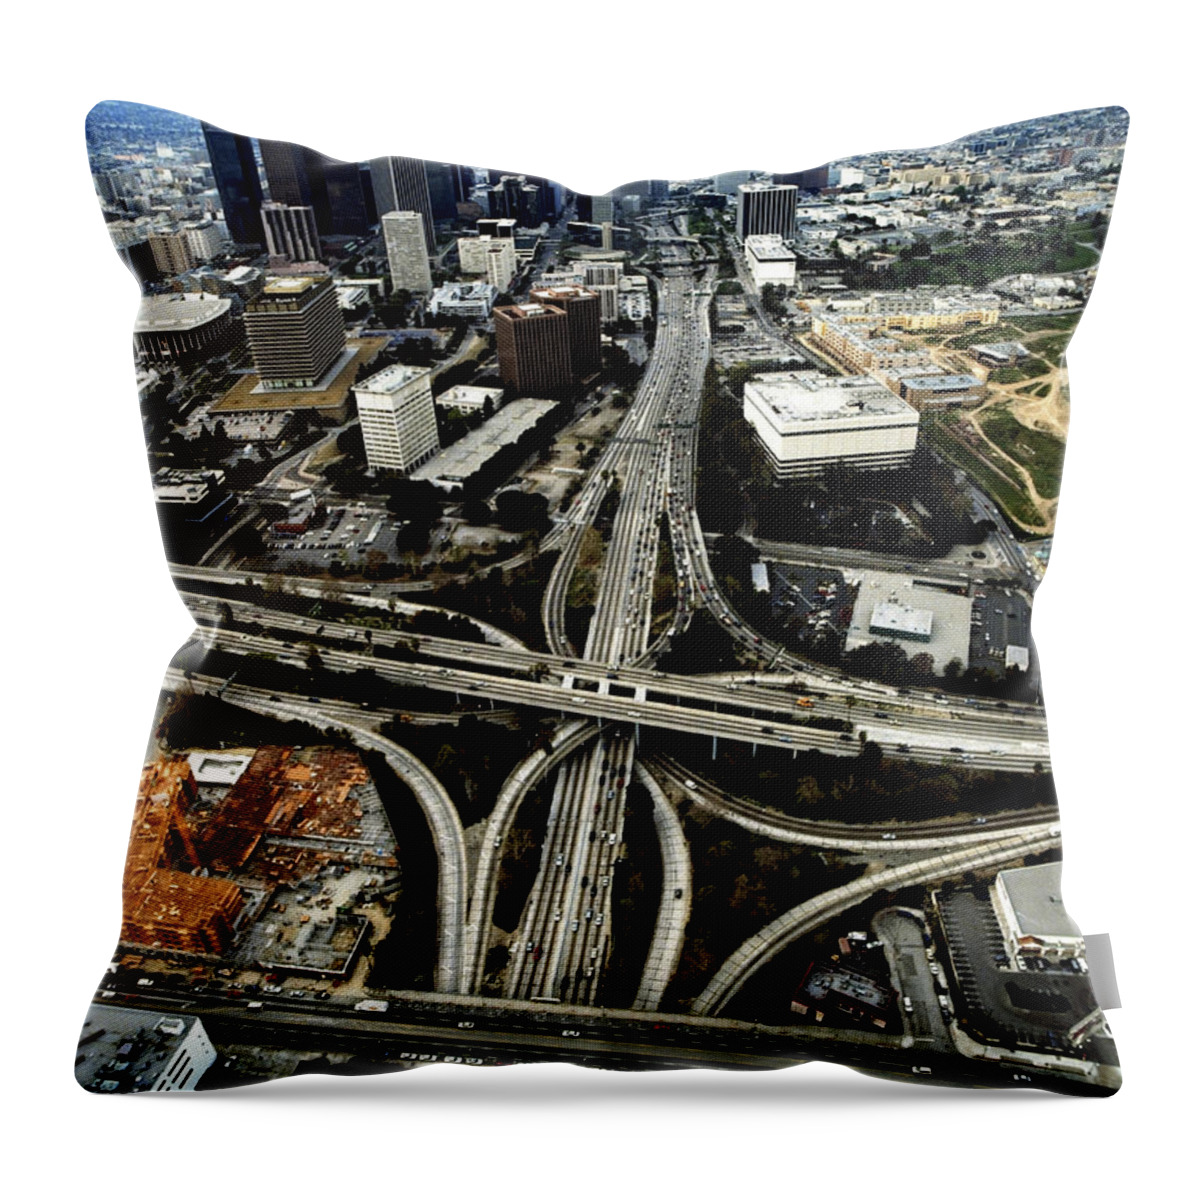 City Throw Pillow featuring the photograph Usa, California, Los Angeles, Downtown by Mike Powell